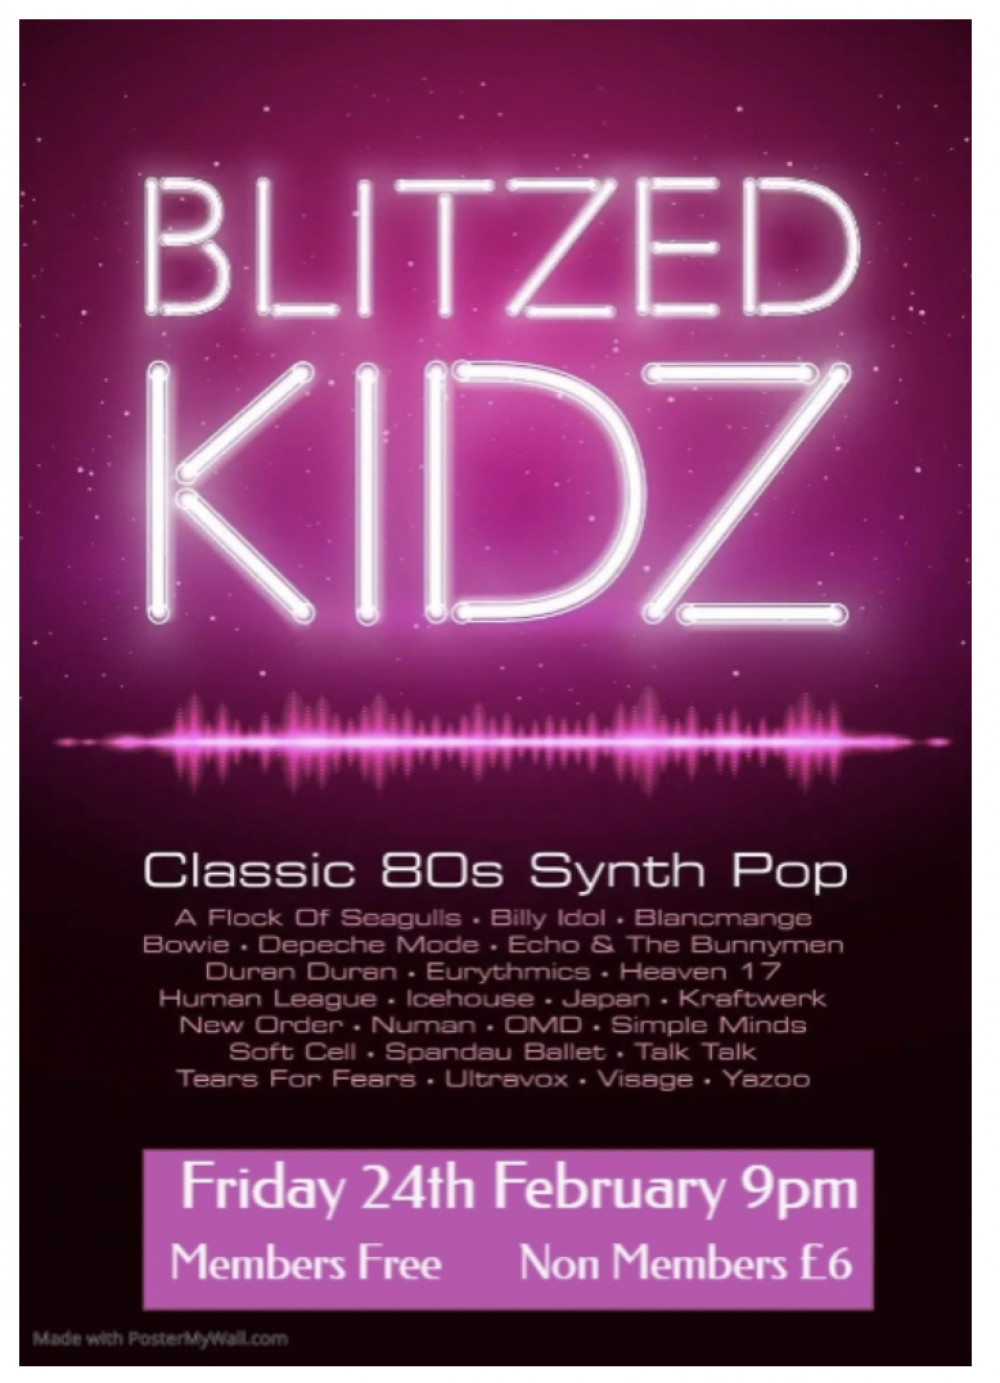 80s Synthesized classics by Blitzed Kidz at the Stotfold Con Club